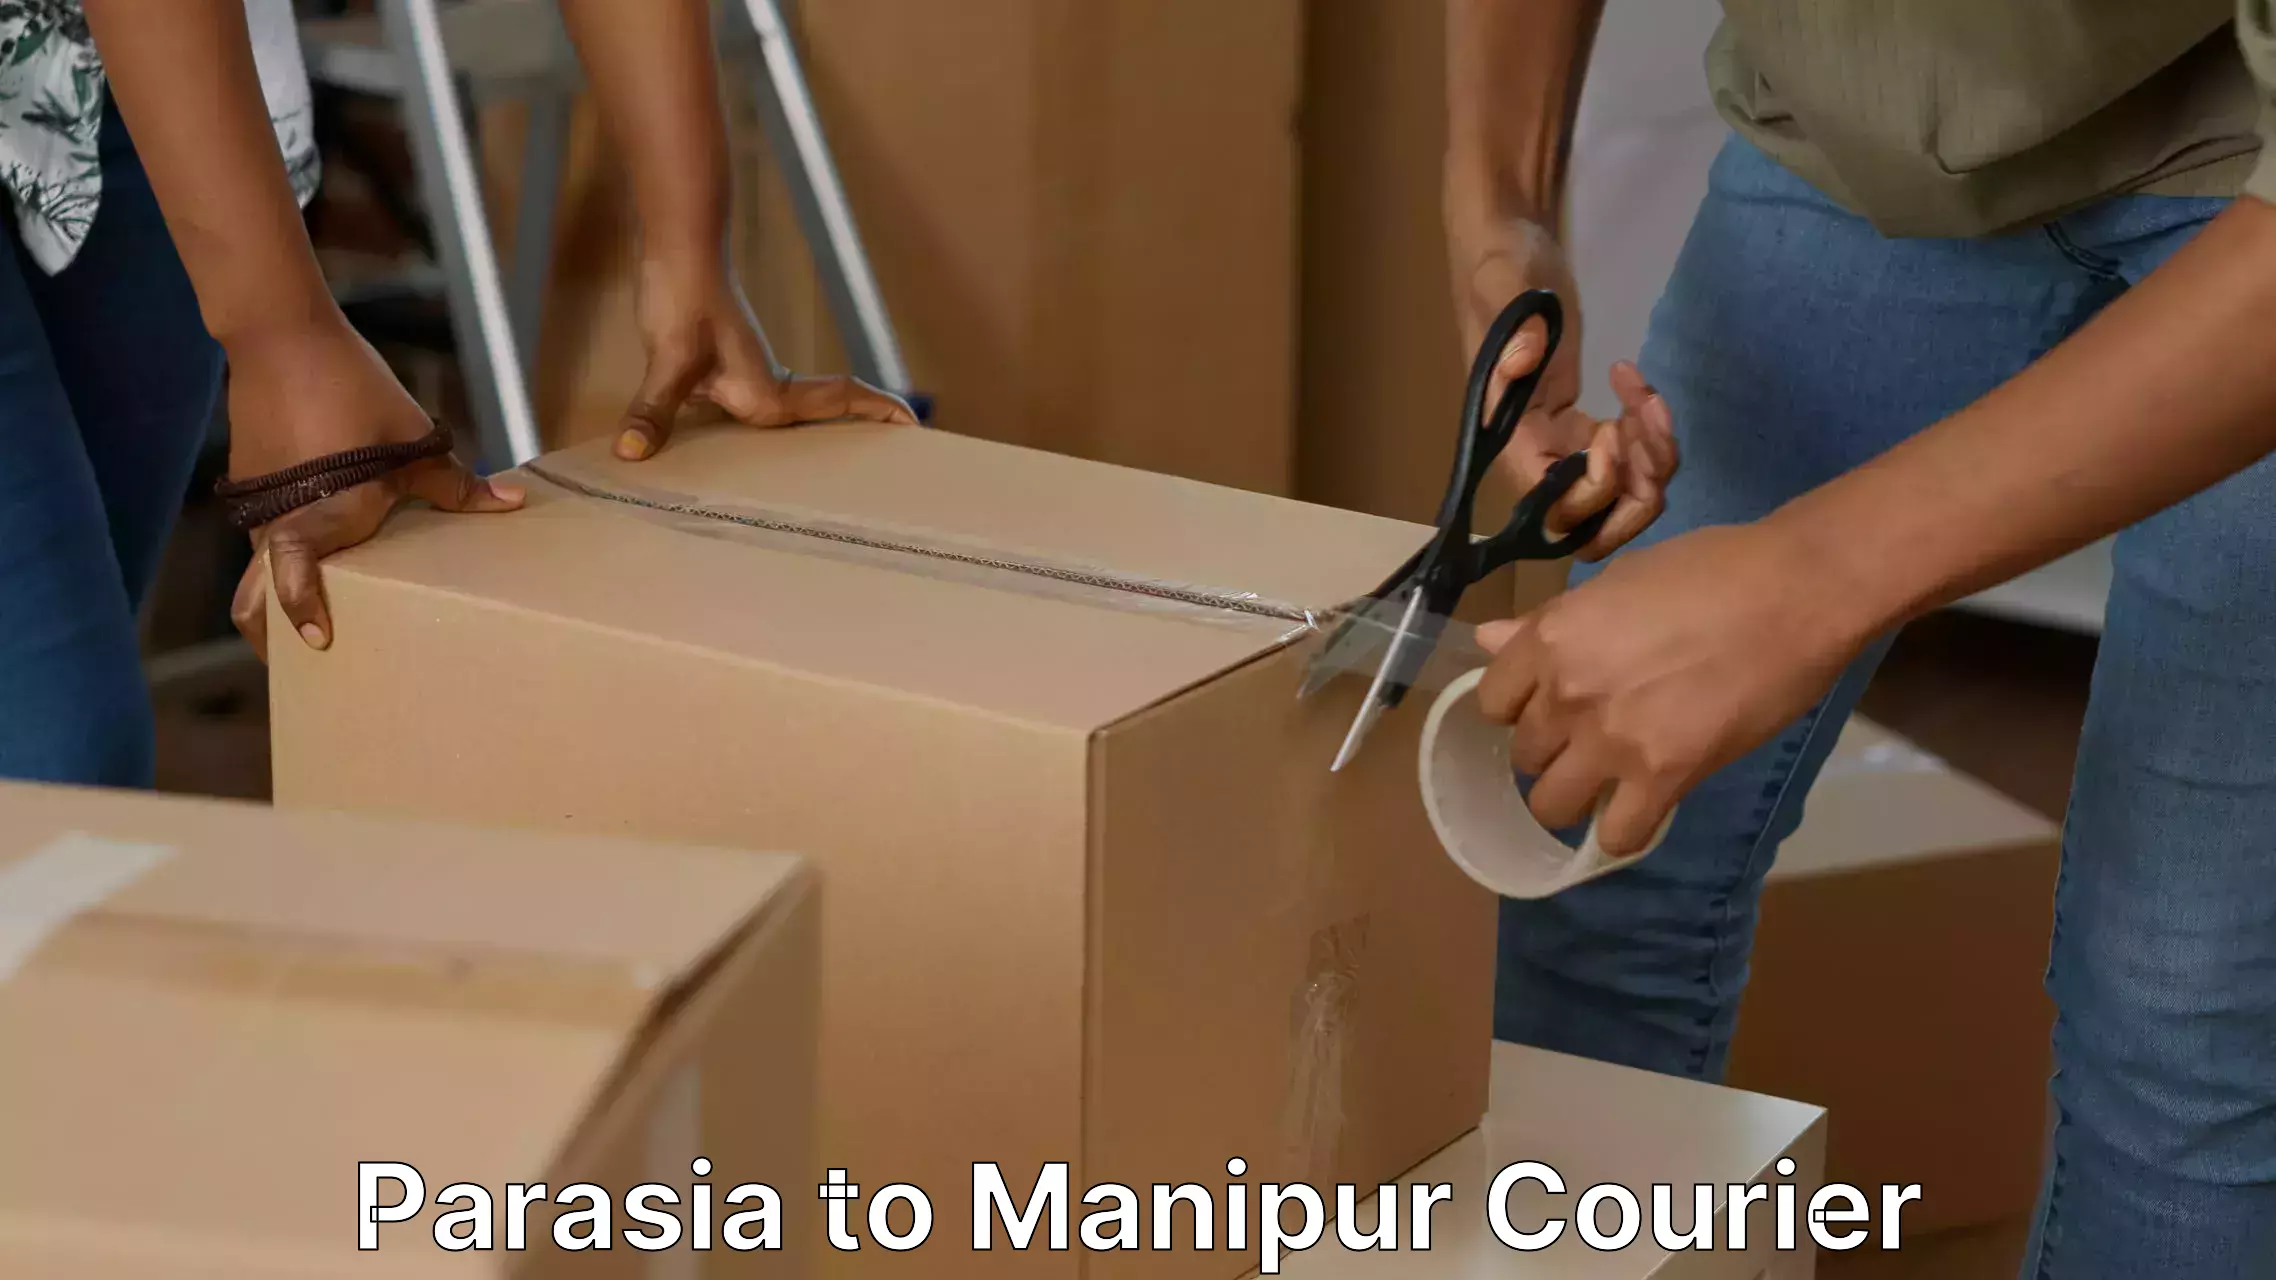 Trusted relocation experts Parasia to Manipur